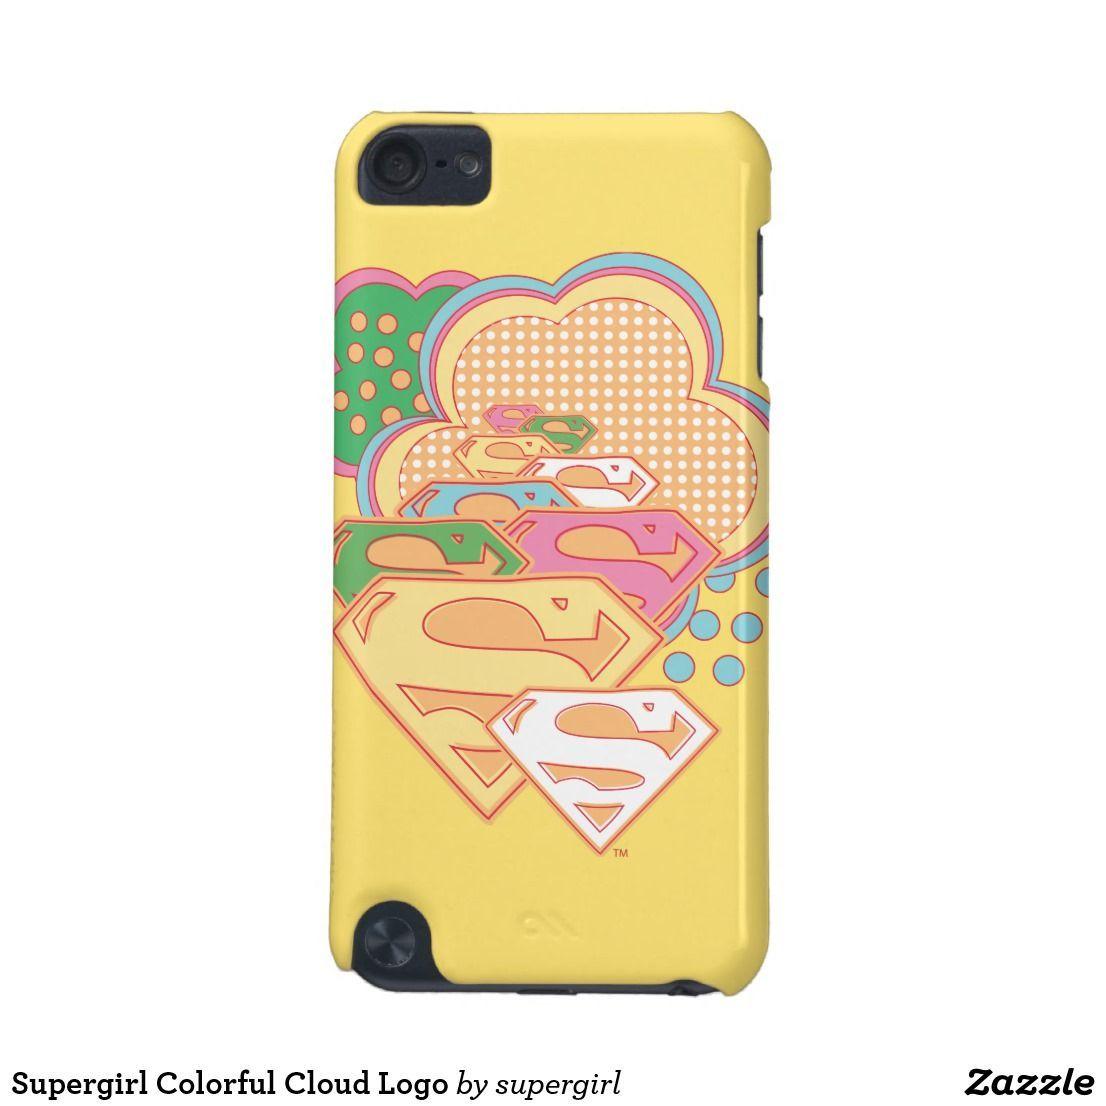 5th Comic Book Style Logo - Supergirl Colorful Cloud Logo iPod Touch (5th Generation) Case